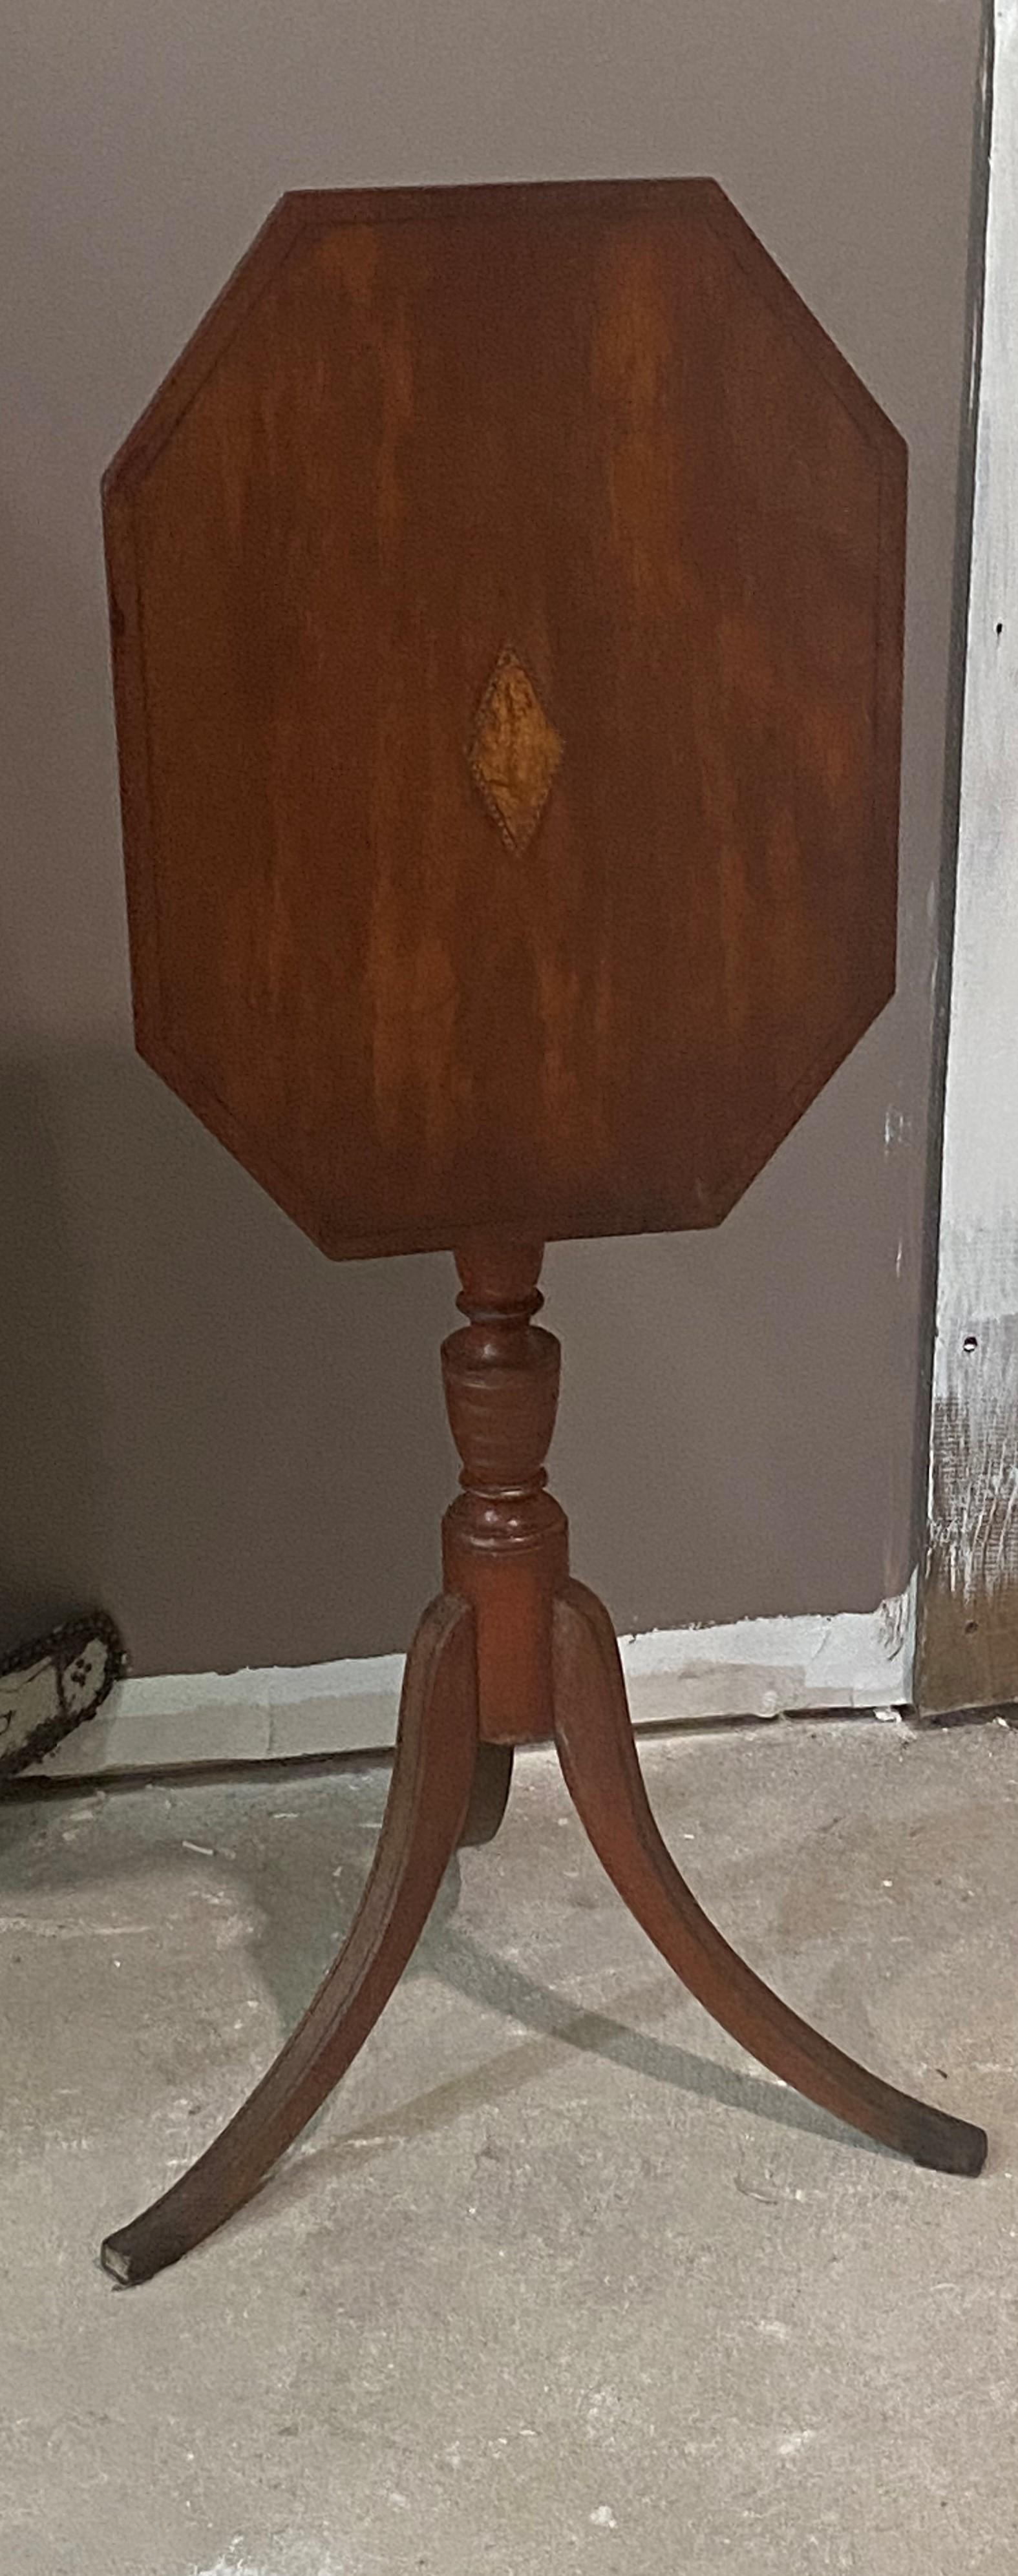 Tilt Top Federal candlestand with original turnkey red on the base, bross banded and with inlay on toop. Found in Maiine, New Hampshire or Maine origin with that plain foot. Clean honest table.